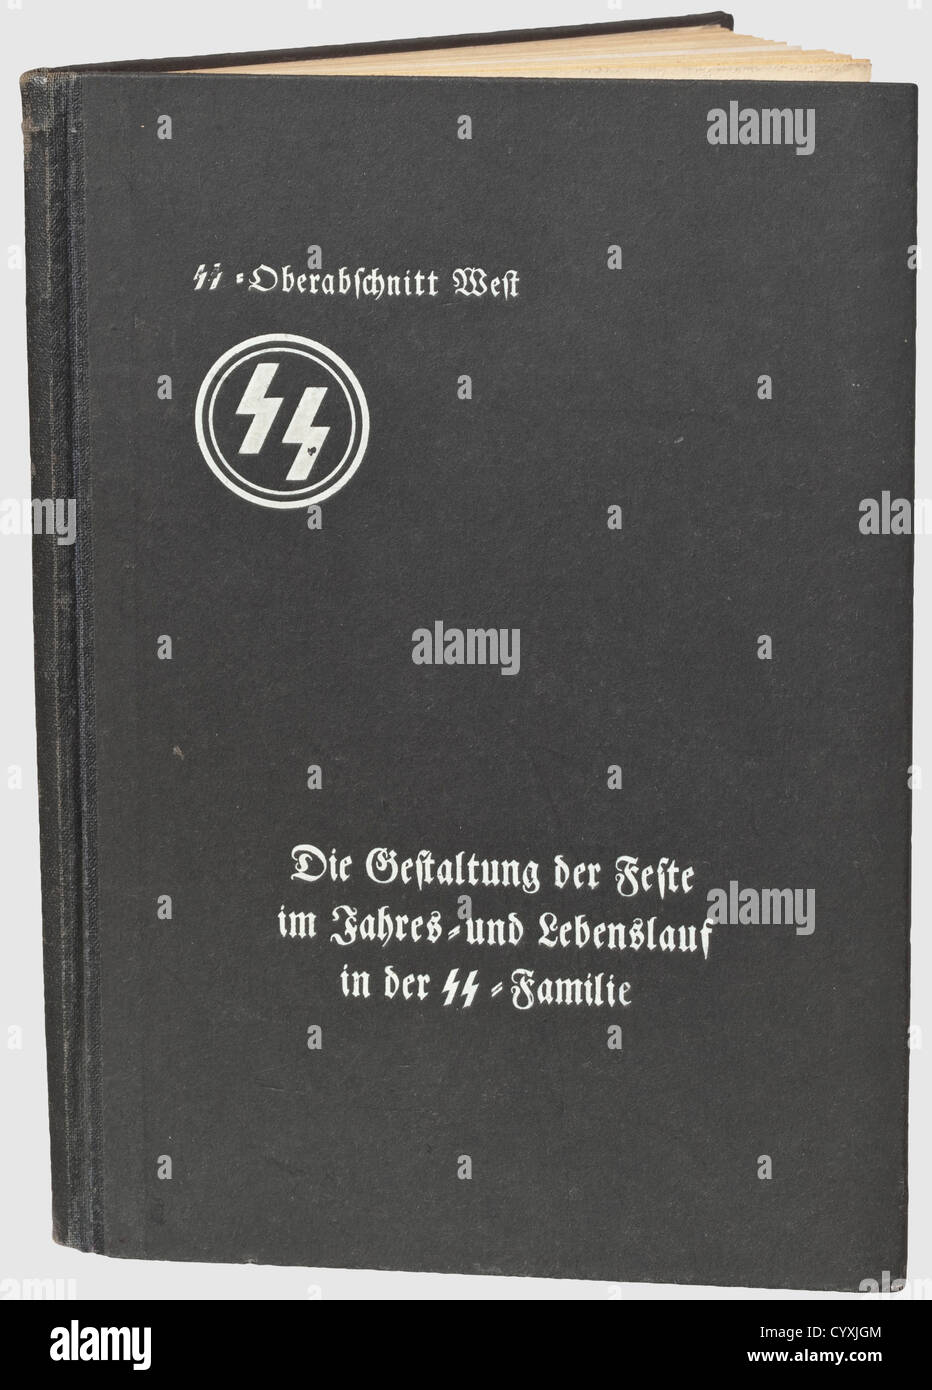 An annual celebrations book of the SS-family,Völkischer Verlag,F. Weitzel Volume on the arrangement of holidays during the course of a year and a lifetime in the SS family,issued by SS-Oberabschnitt West by Gruppenführer Weitzel,79 pages with illustrations. Textbook on the chronology of holidays like Christmas,Summer Solstice,birthdays etc. as well as marriage,entry into the HJ and SS,song lyrics,descriptions of the yule and SS corners,family books,runes. Very rare,historic,historical,1930s,1930s,20th century,Waffen-SS,armed division of the SS,Additional-Rights-Clearences-Not Available Stock Photo